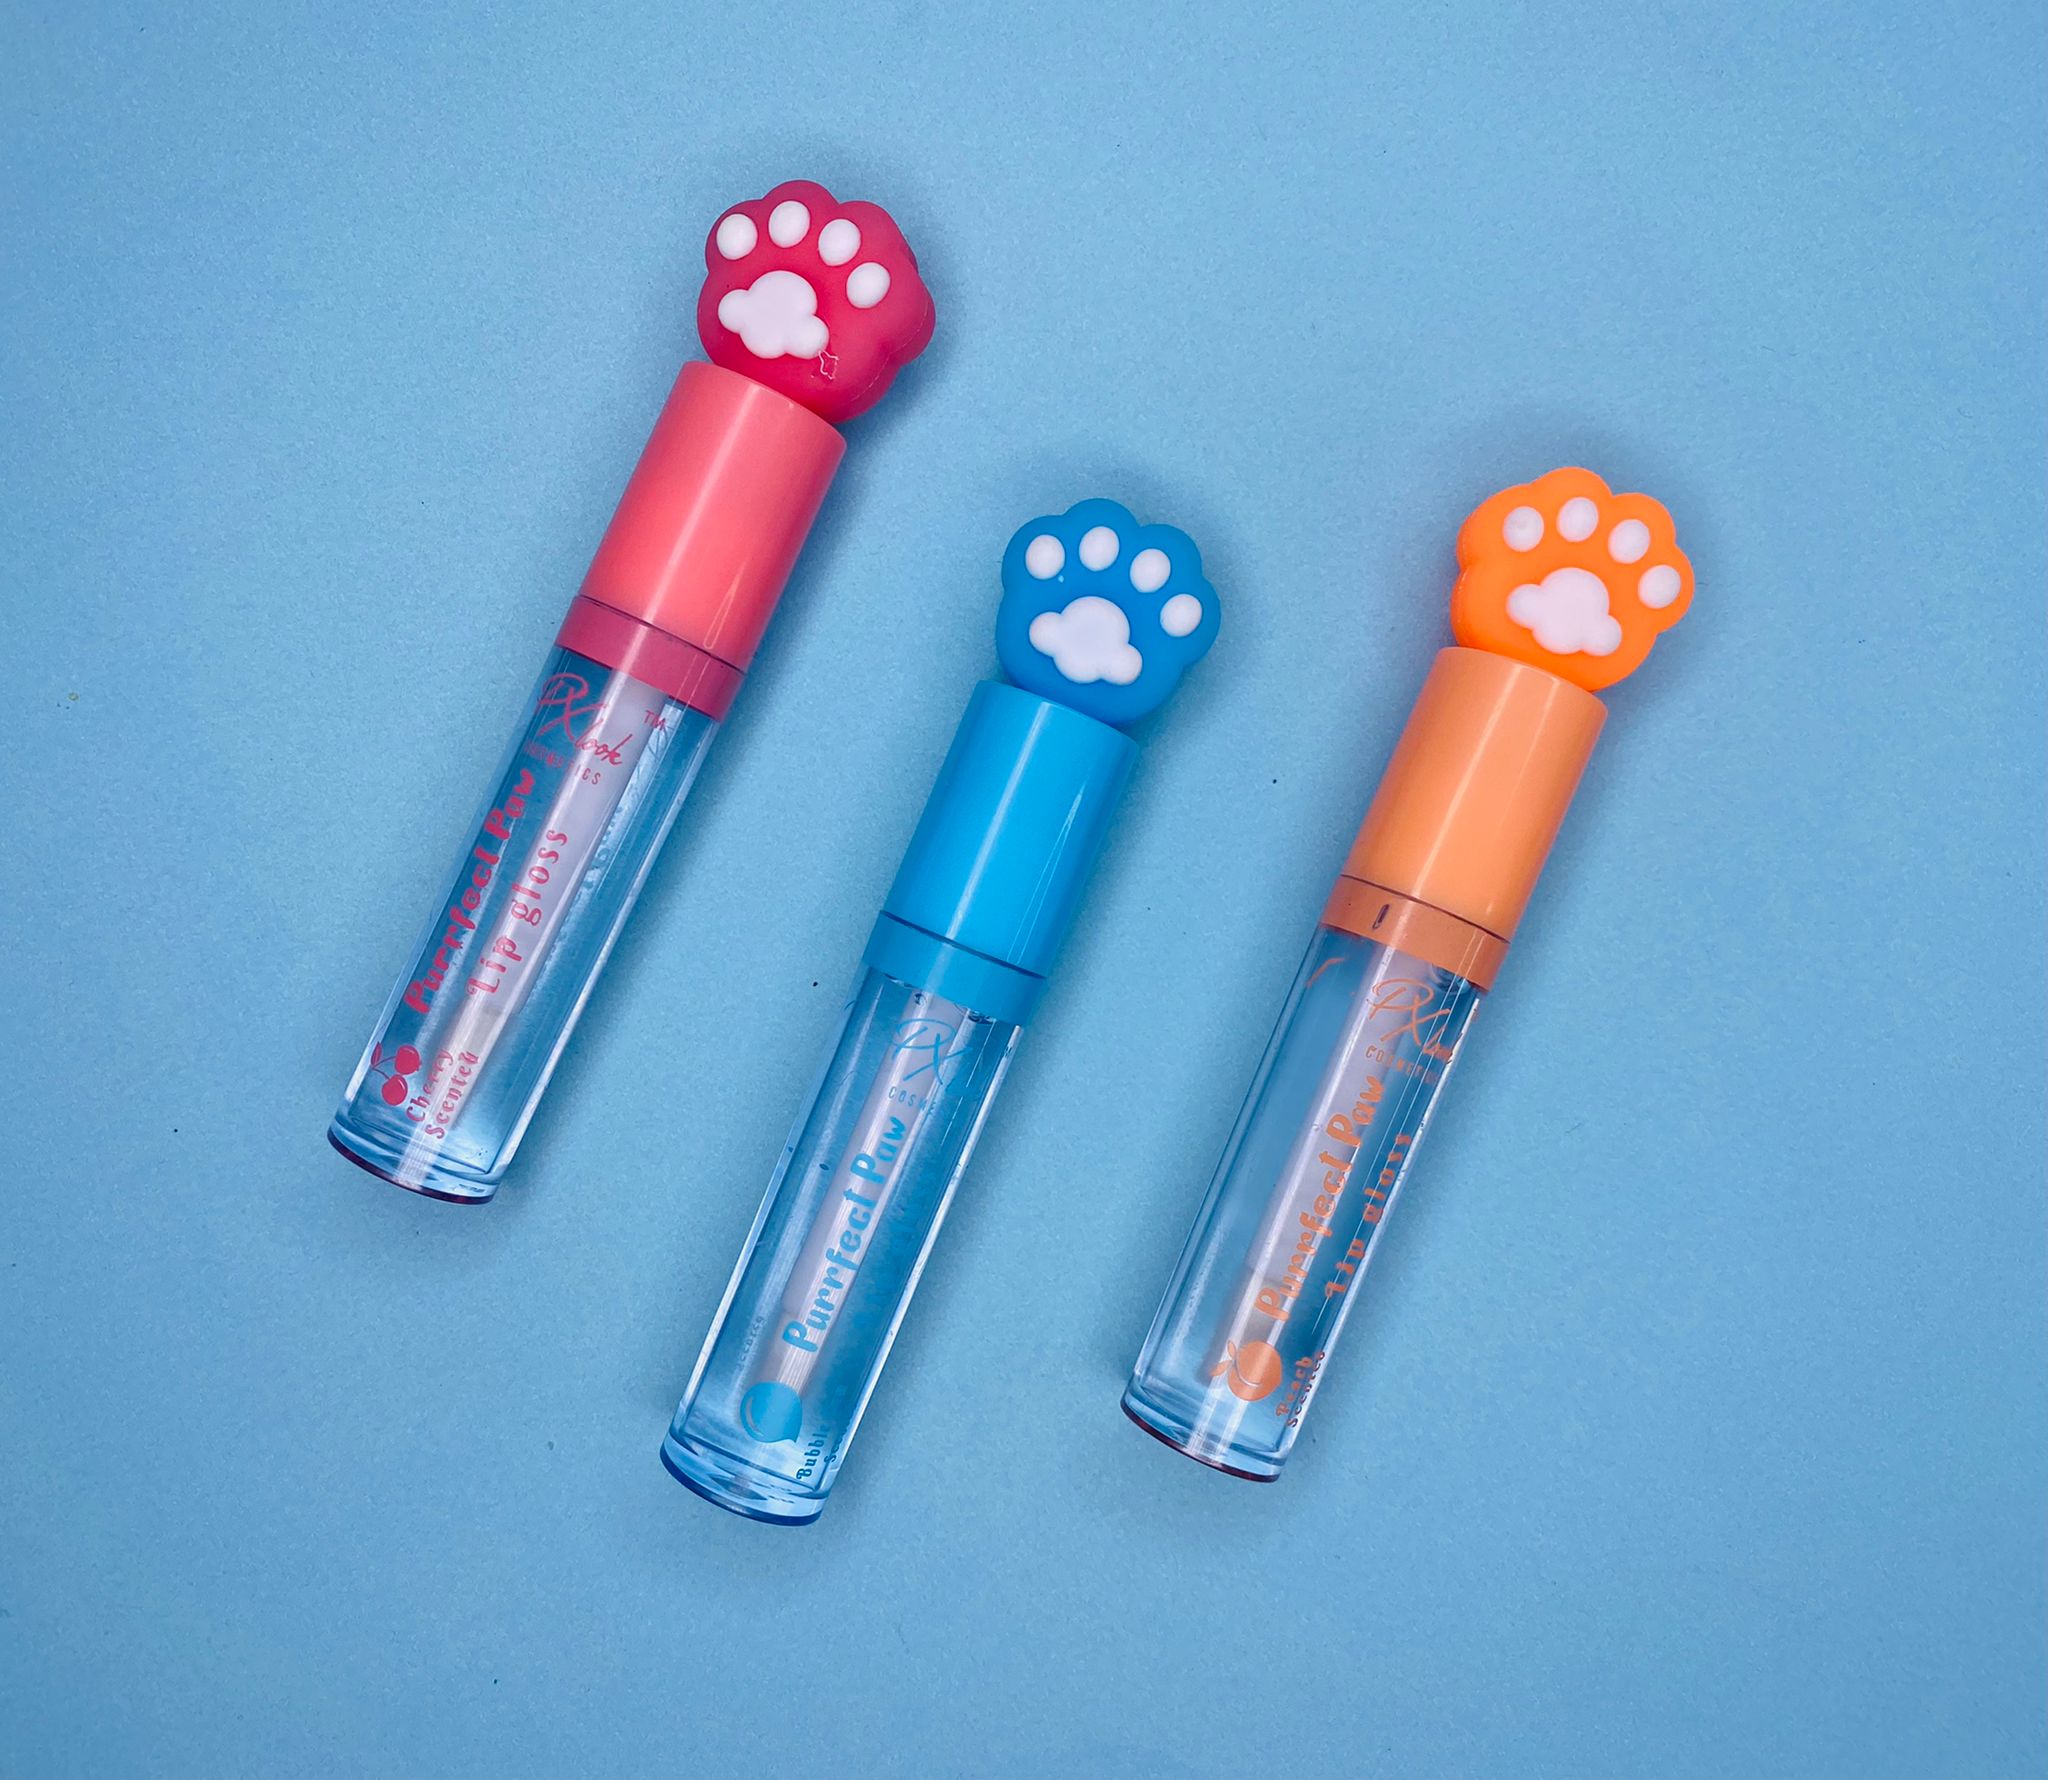 PxLook Purrfect Paw Lipgloss